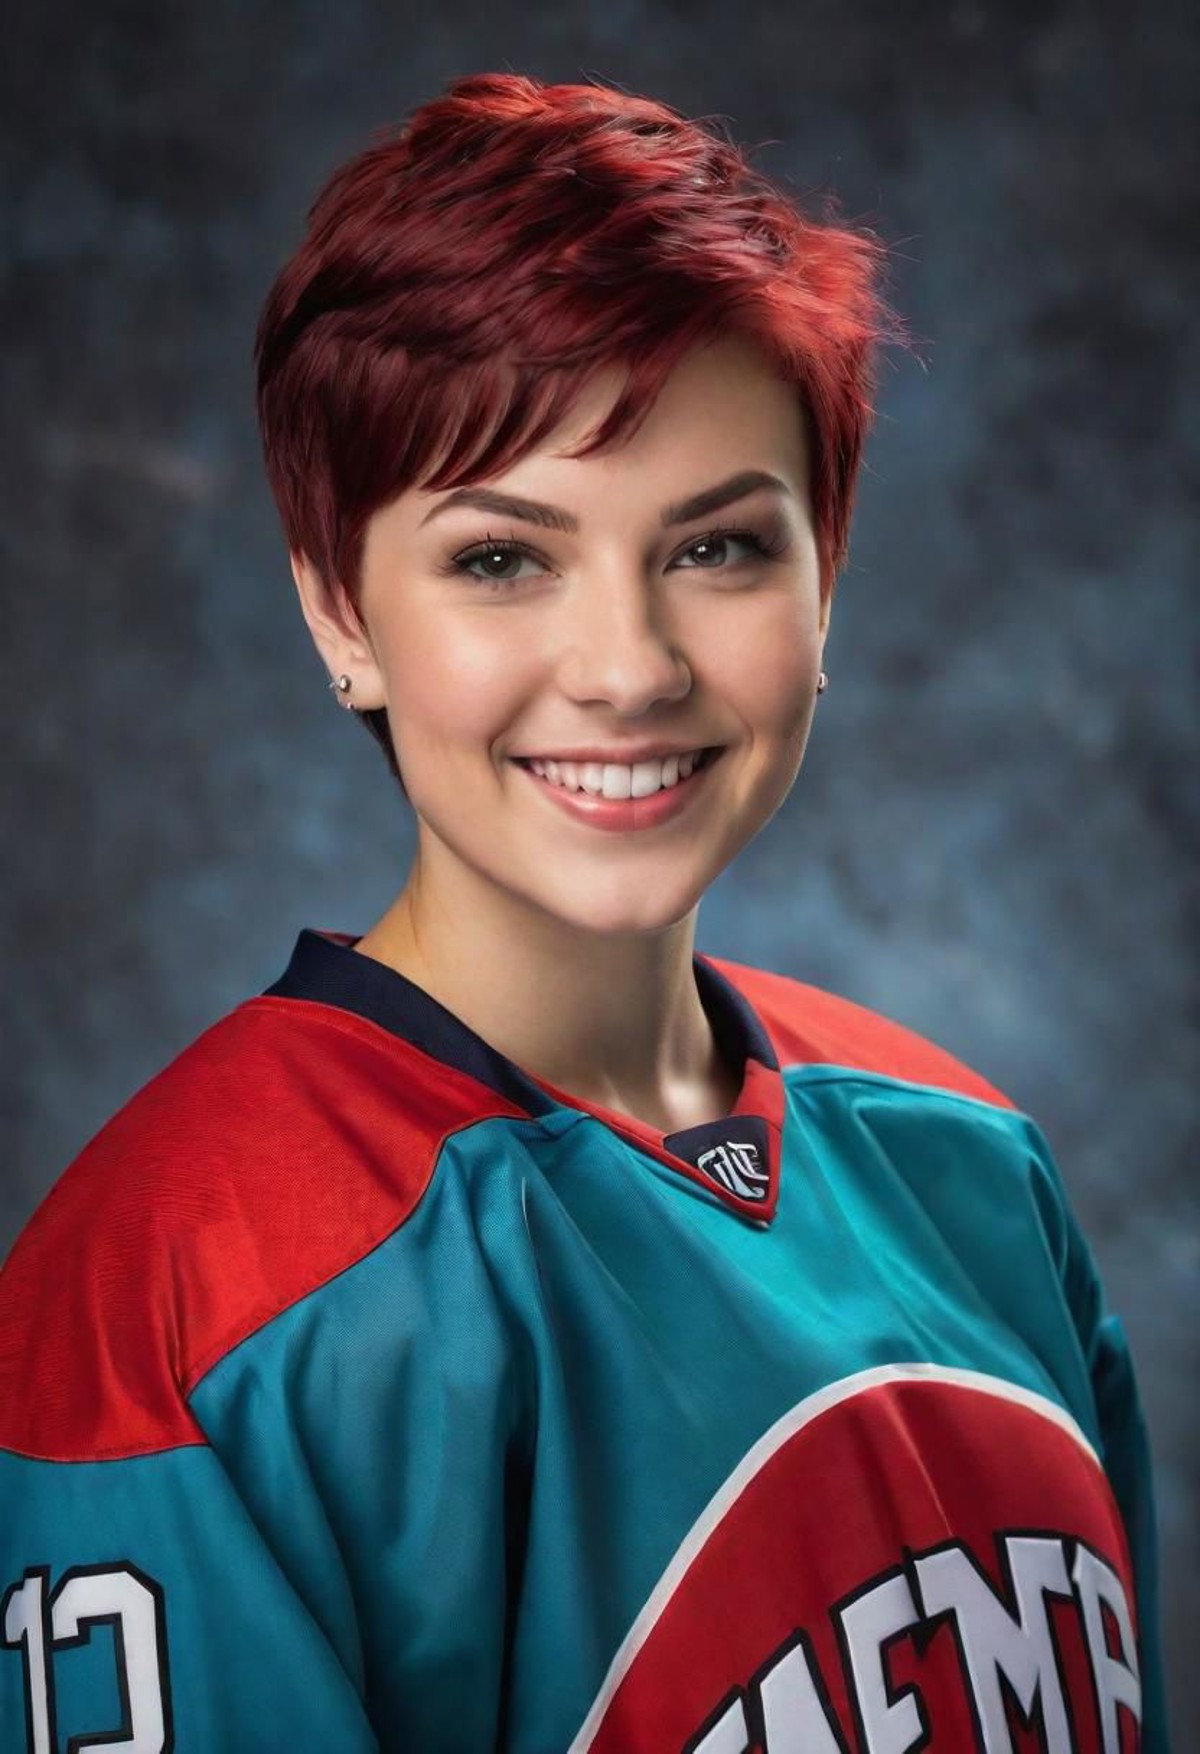 18 year old, medium sized, confident looking woman. Evil grin. Red team Ice Hockey gear. Short hair in a pixie cut.